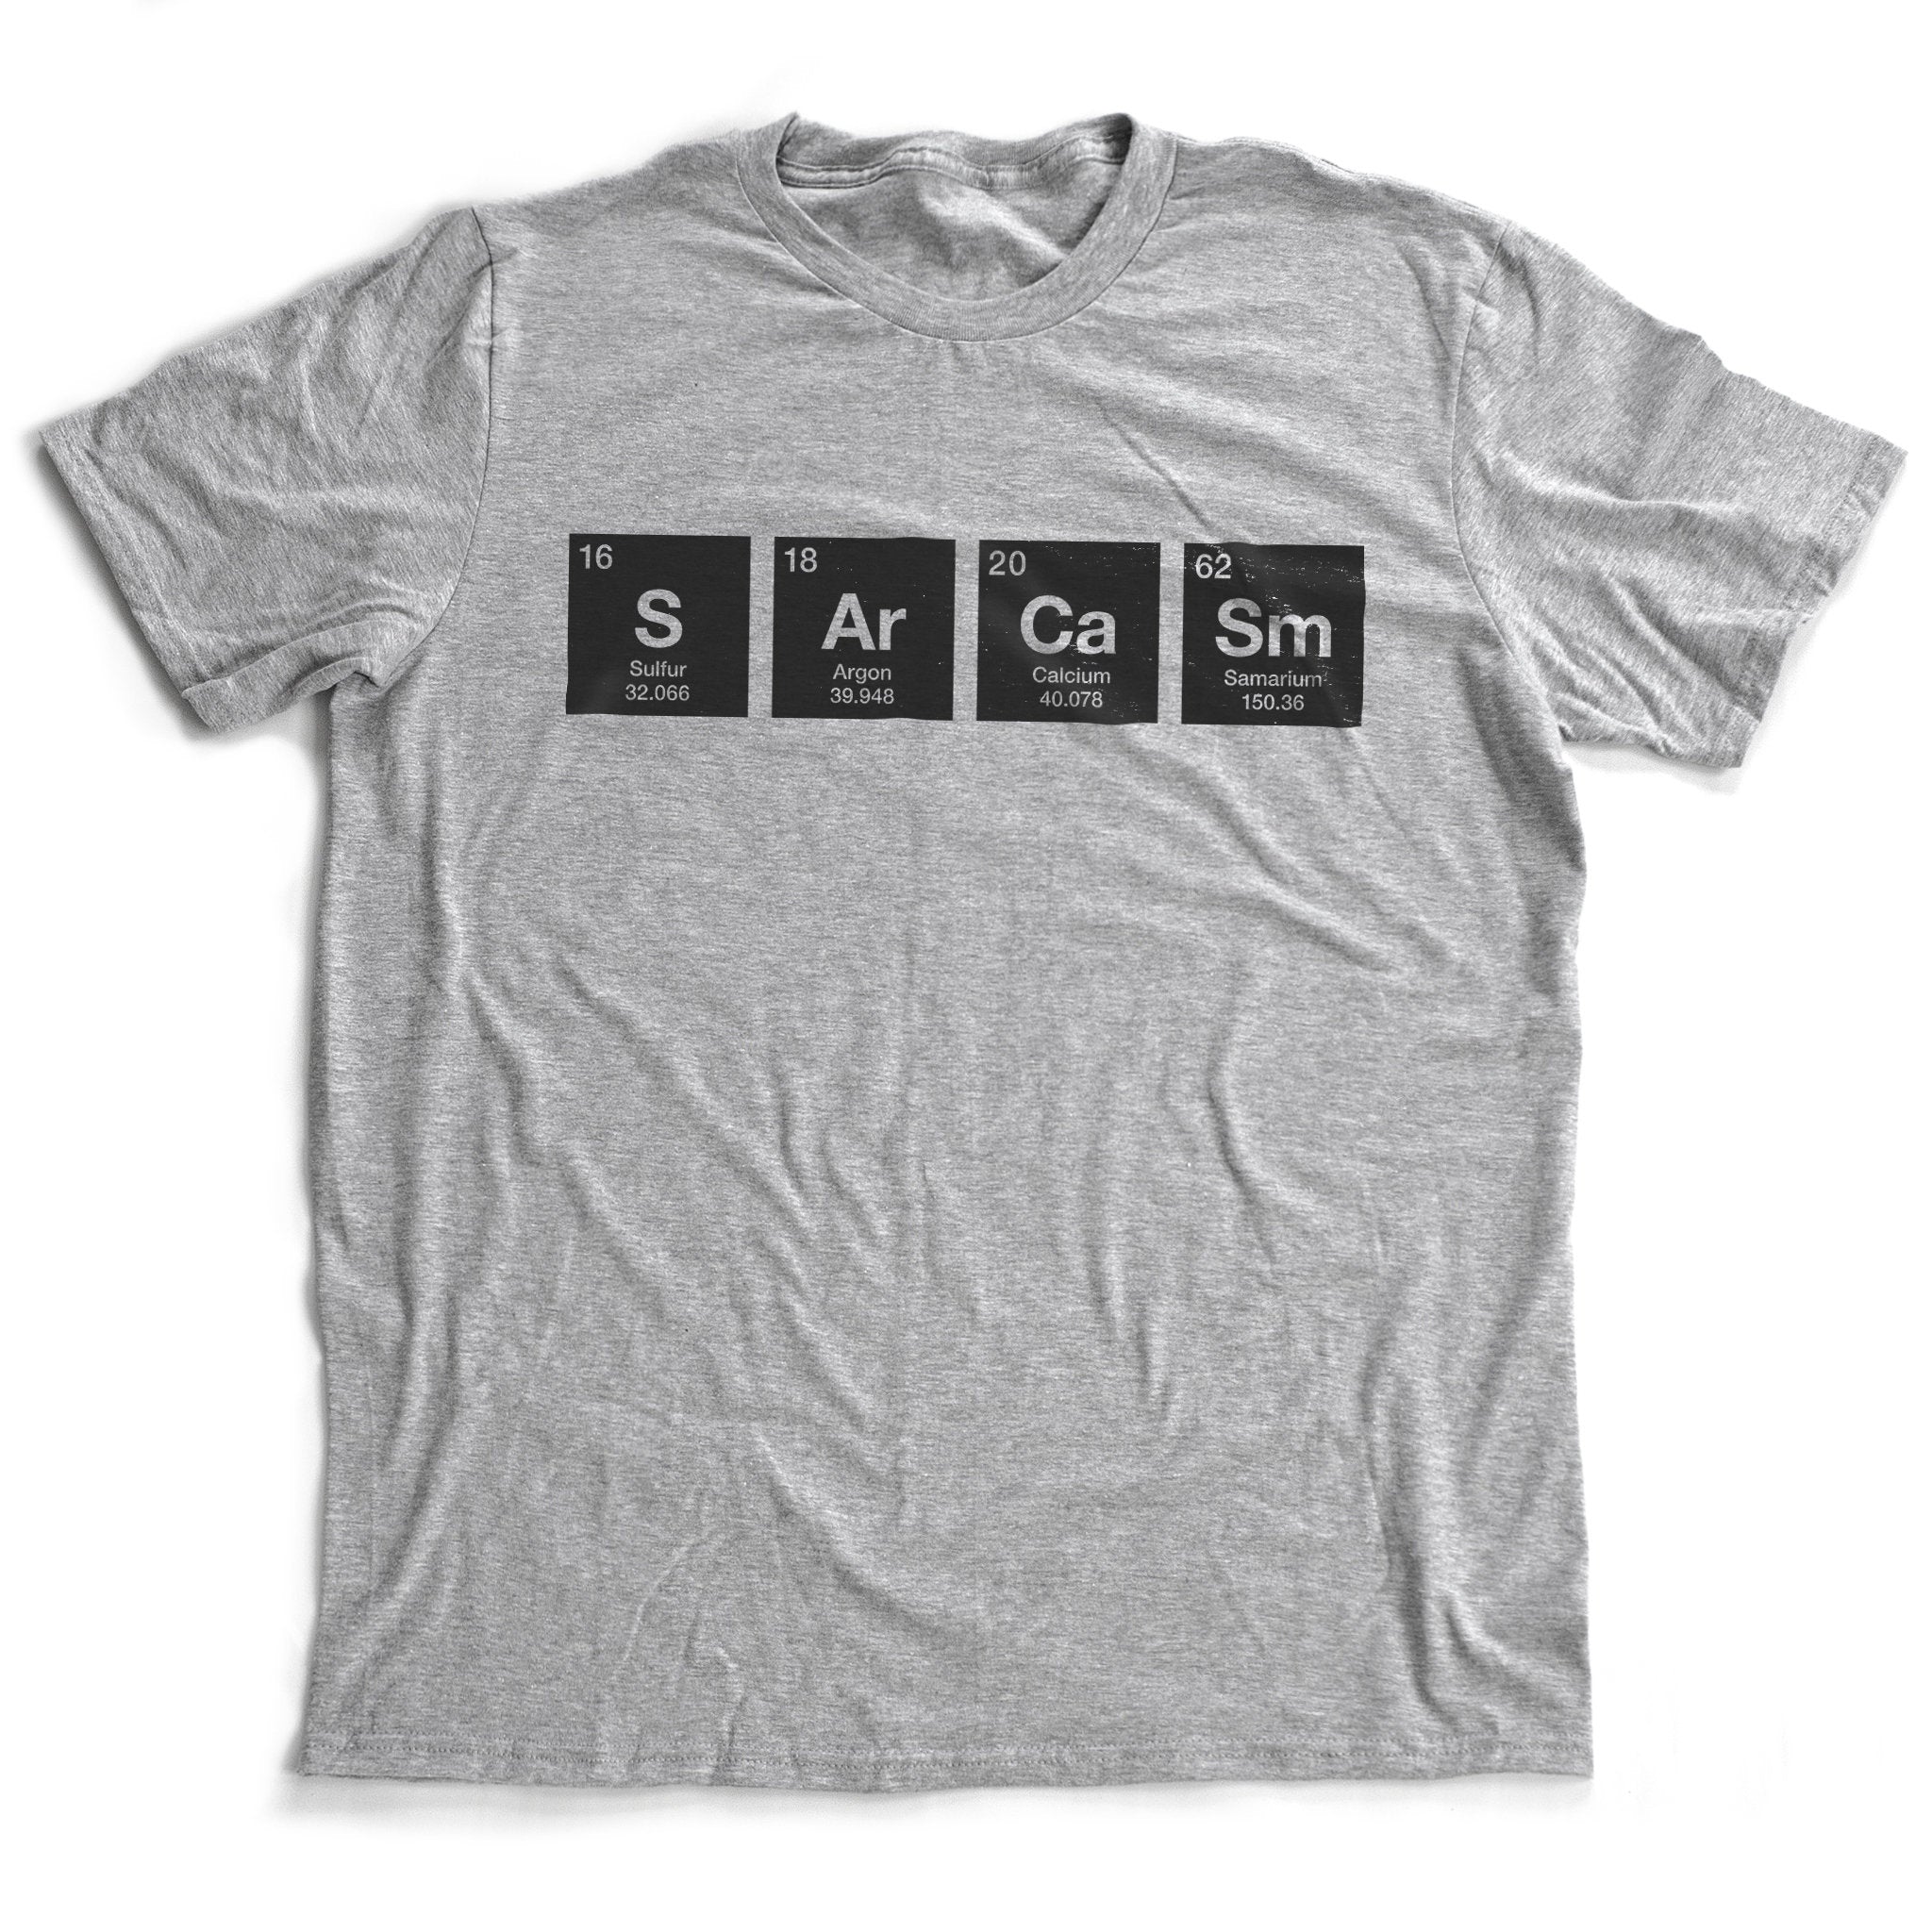 SARCASM  — S Ar Ca Sm — Periodic Table of the Elements funny t-shirt / inspired by Breaking Bad / for the proud nerd, geek, dweeb